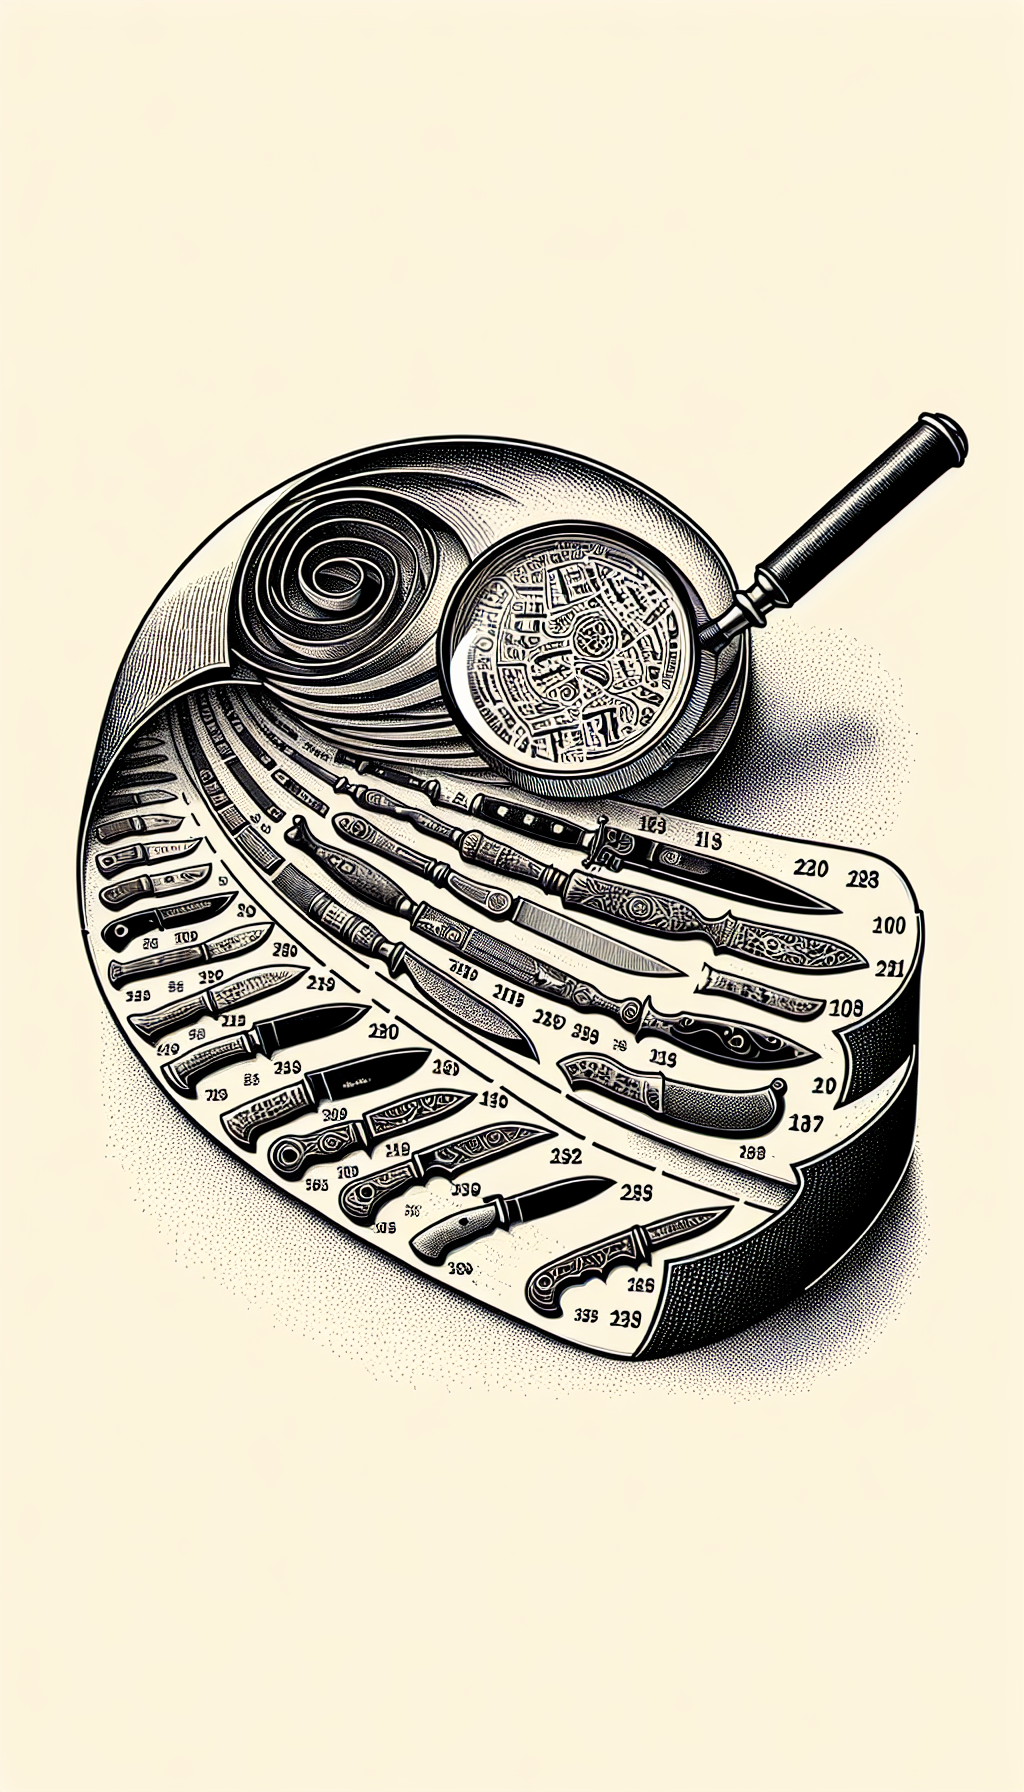 An eclectic illustration depicts a magnifying glass peering over a timeline ribbon that unfurls like a scroll, with prominent dates and stylized knives positioned at respective historical points. Each knife bears unique maker's marks, transitioning from basic etchings to intricate logos—hinting at the art of dating knives through these identifying symbols etched into their blades.